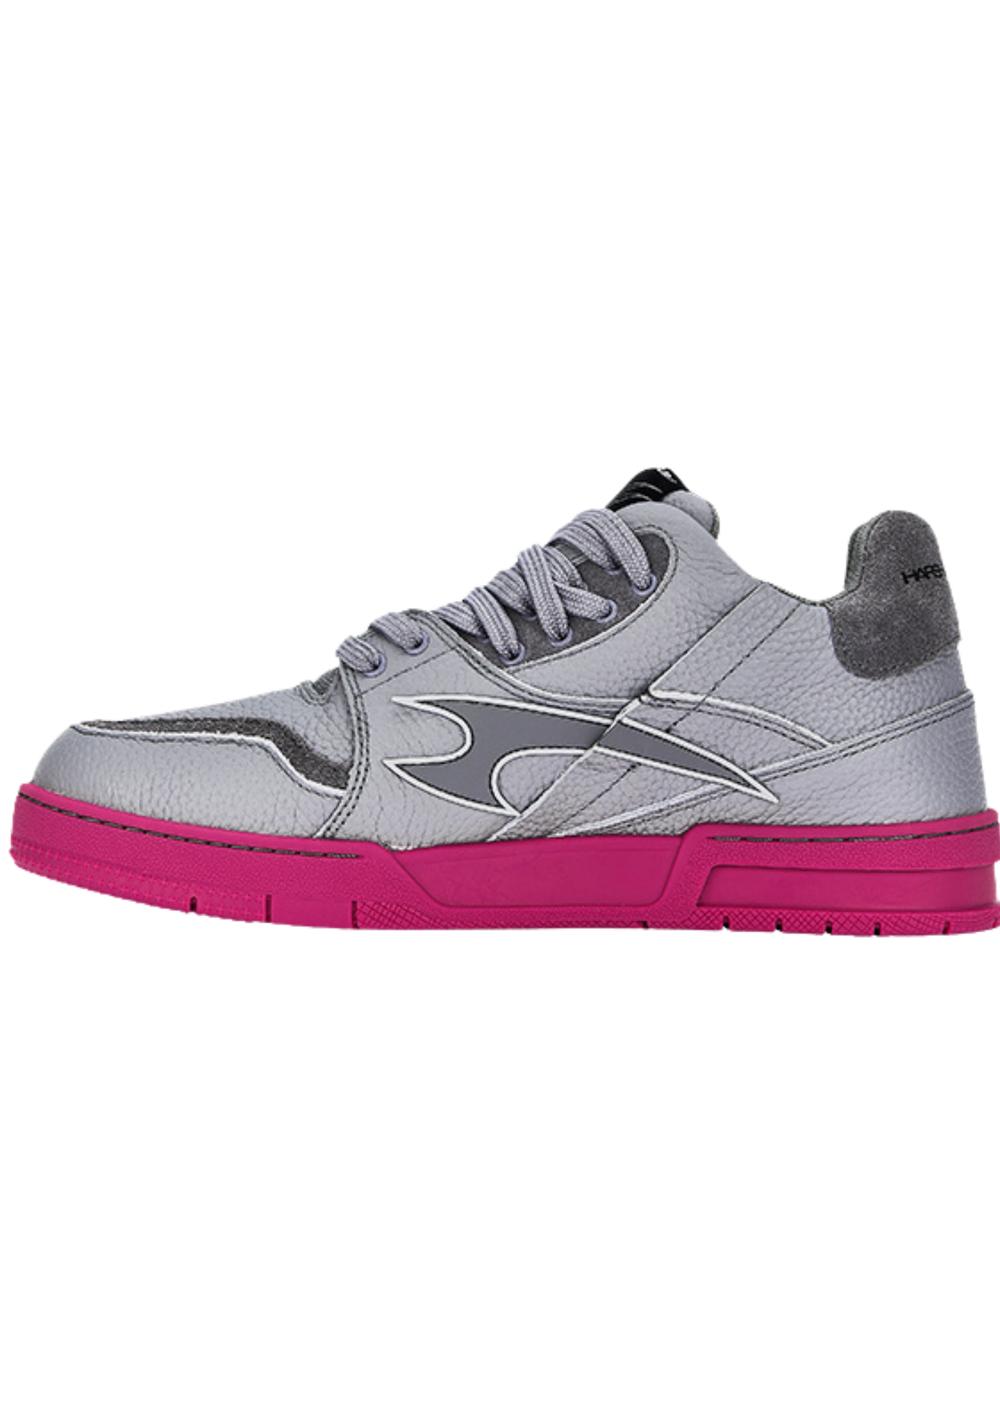 Project *330 Shoes Grey&Pink - PSYLOS 1